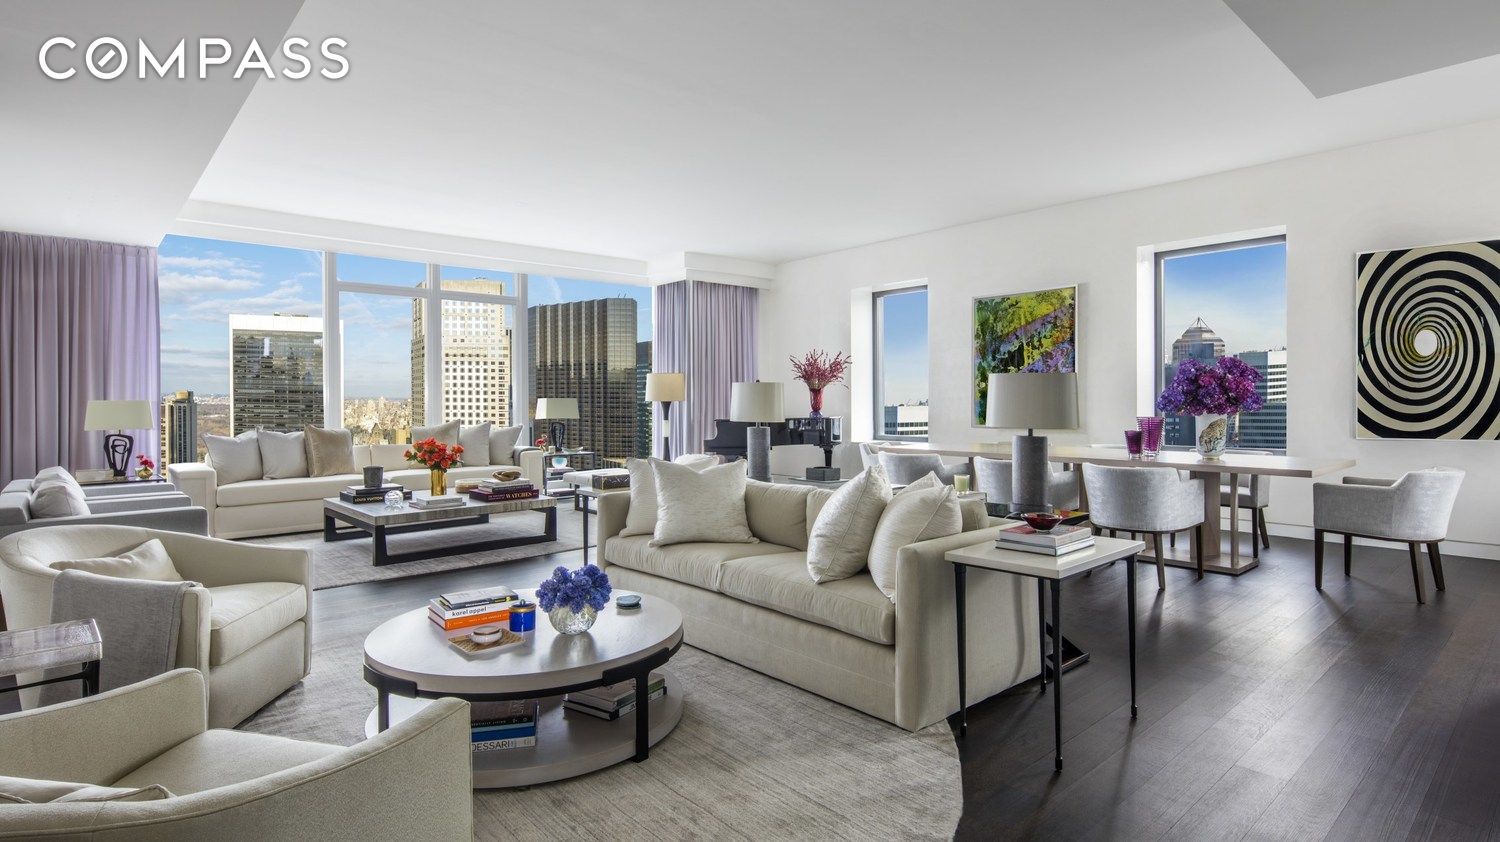 20 West 53rd Street 42A, Midtown Central, Midtown East, NYC - 4 Bedrooms  
4.5 Bathrooms  
6 Rooms - 